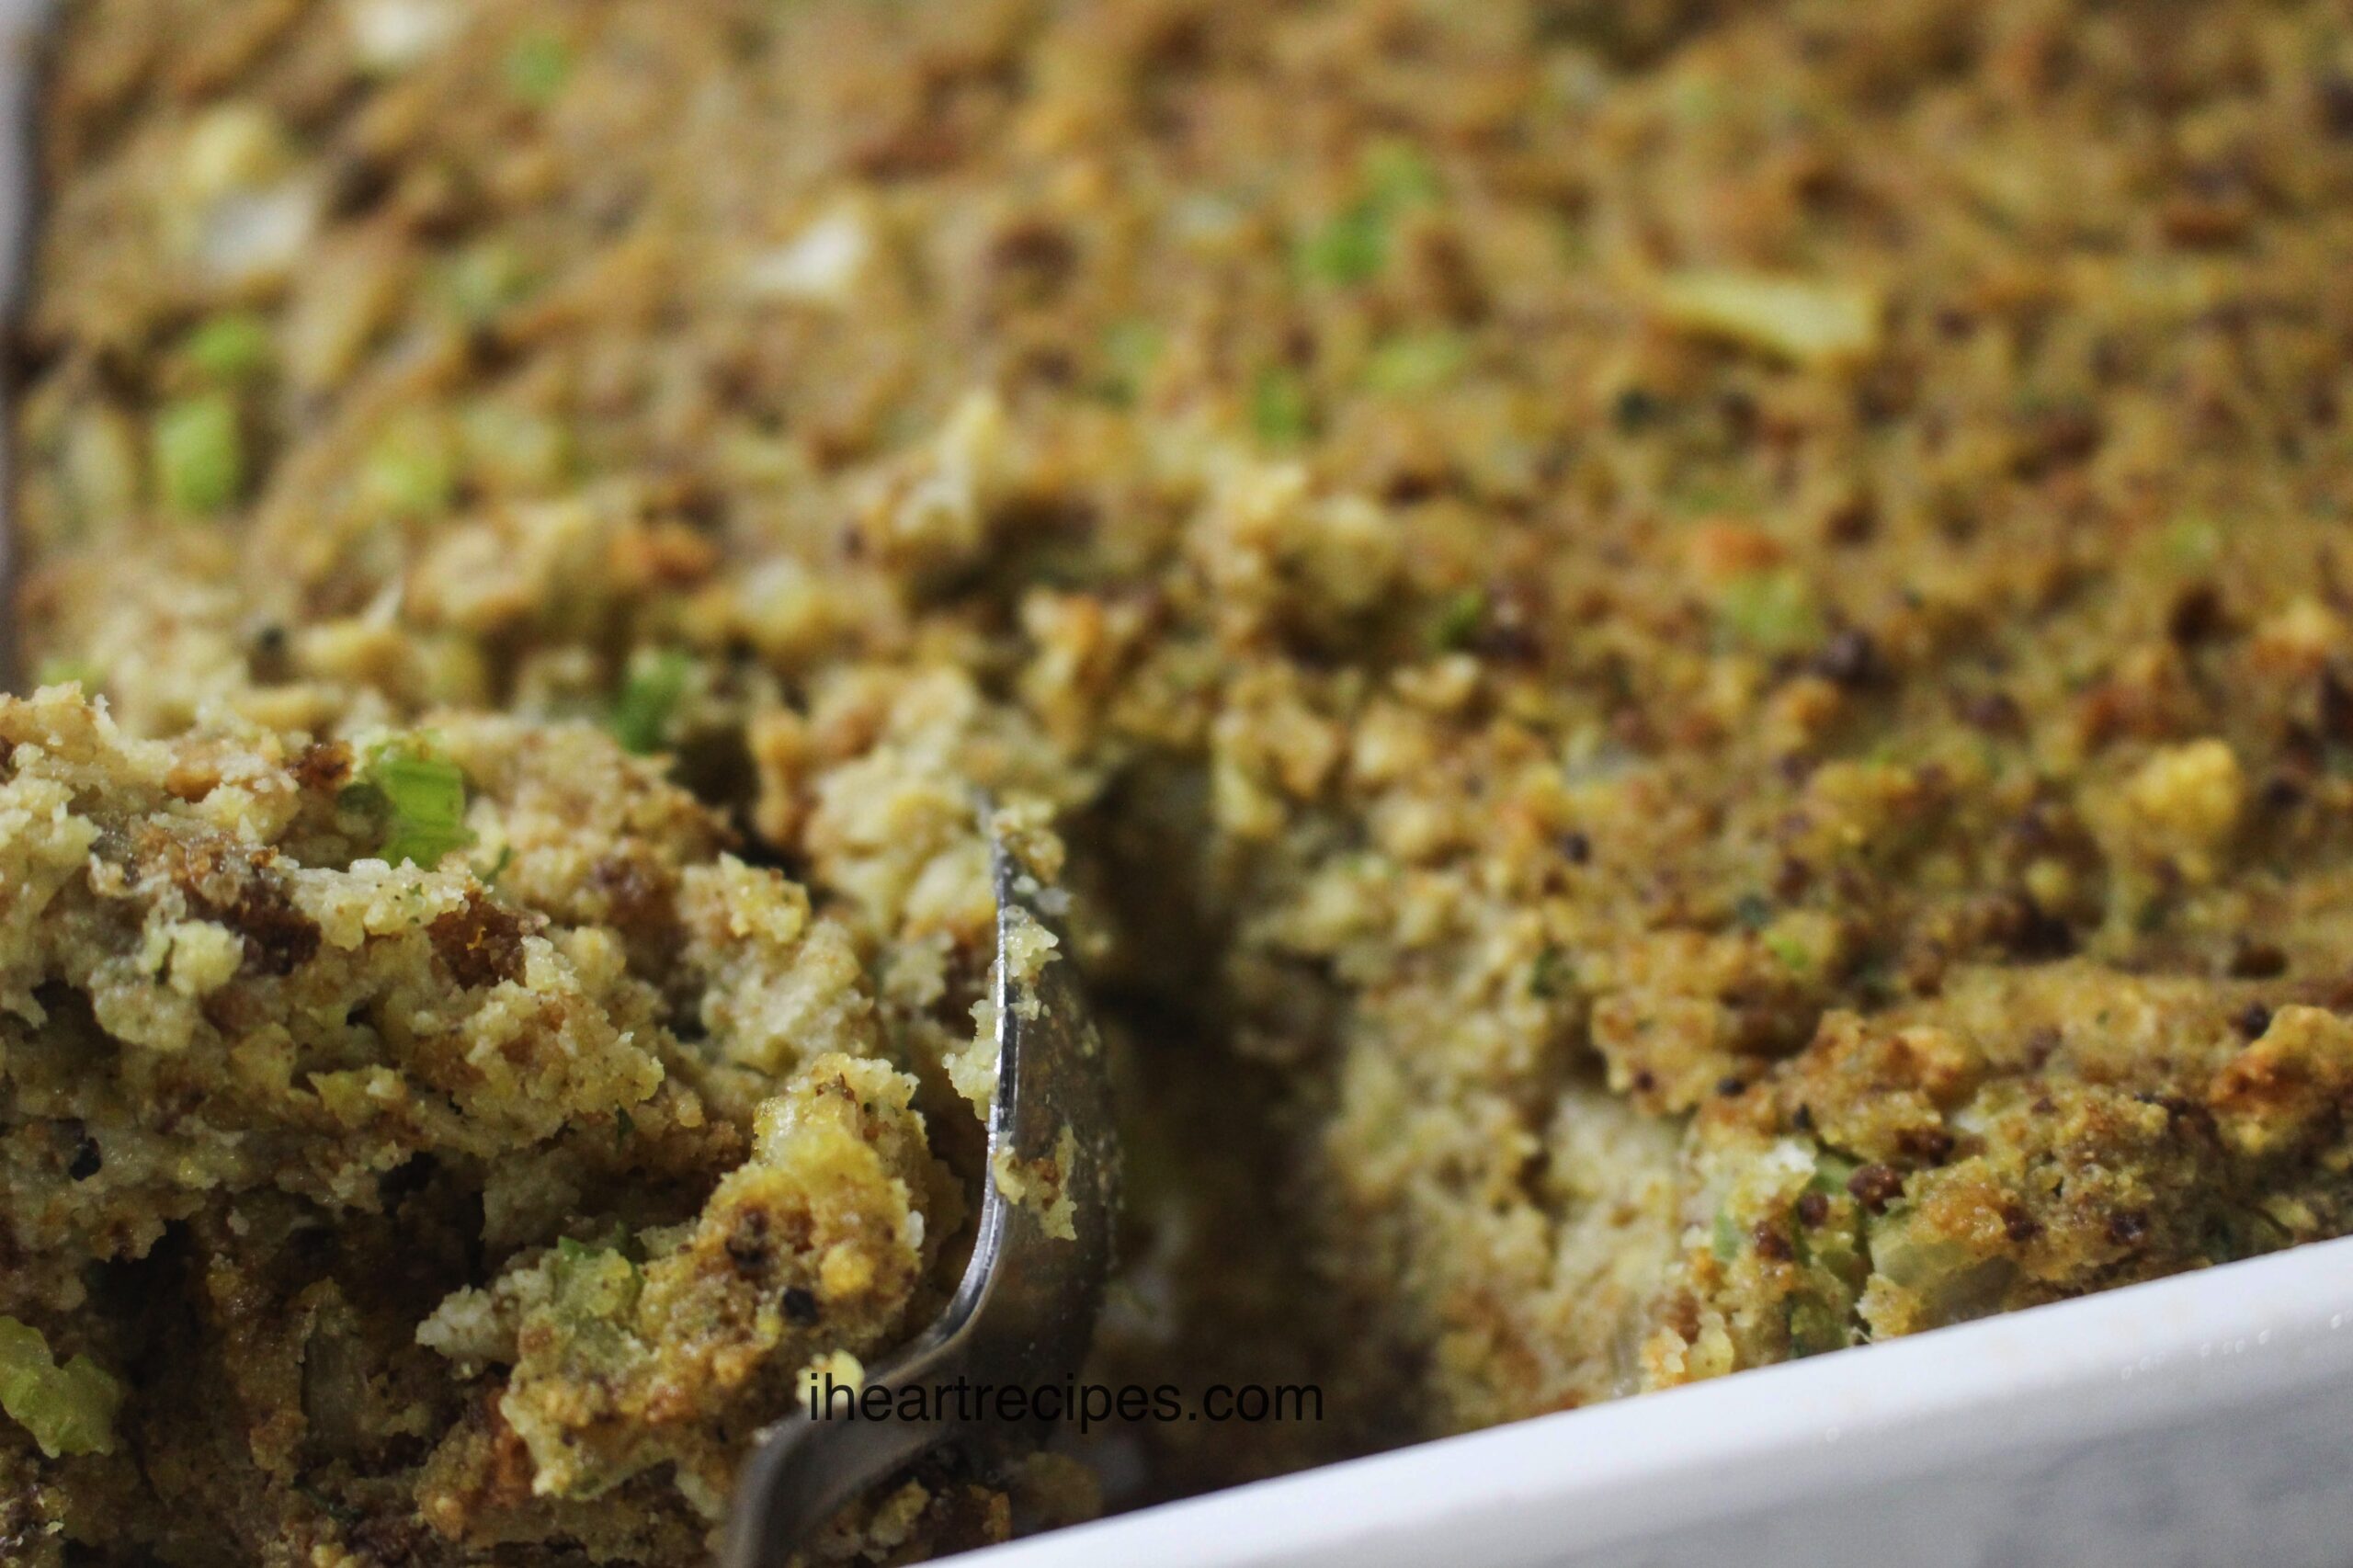 A close-up image of a savory cornbread dressing, with a metal spoon scooping up a serving.